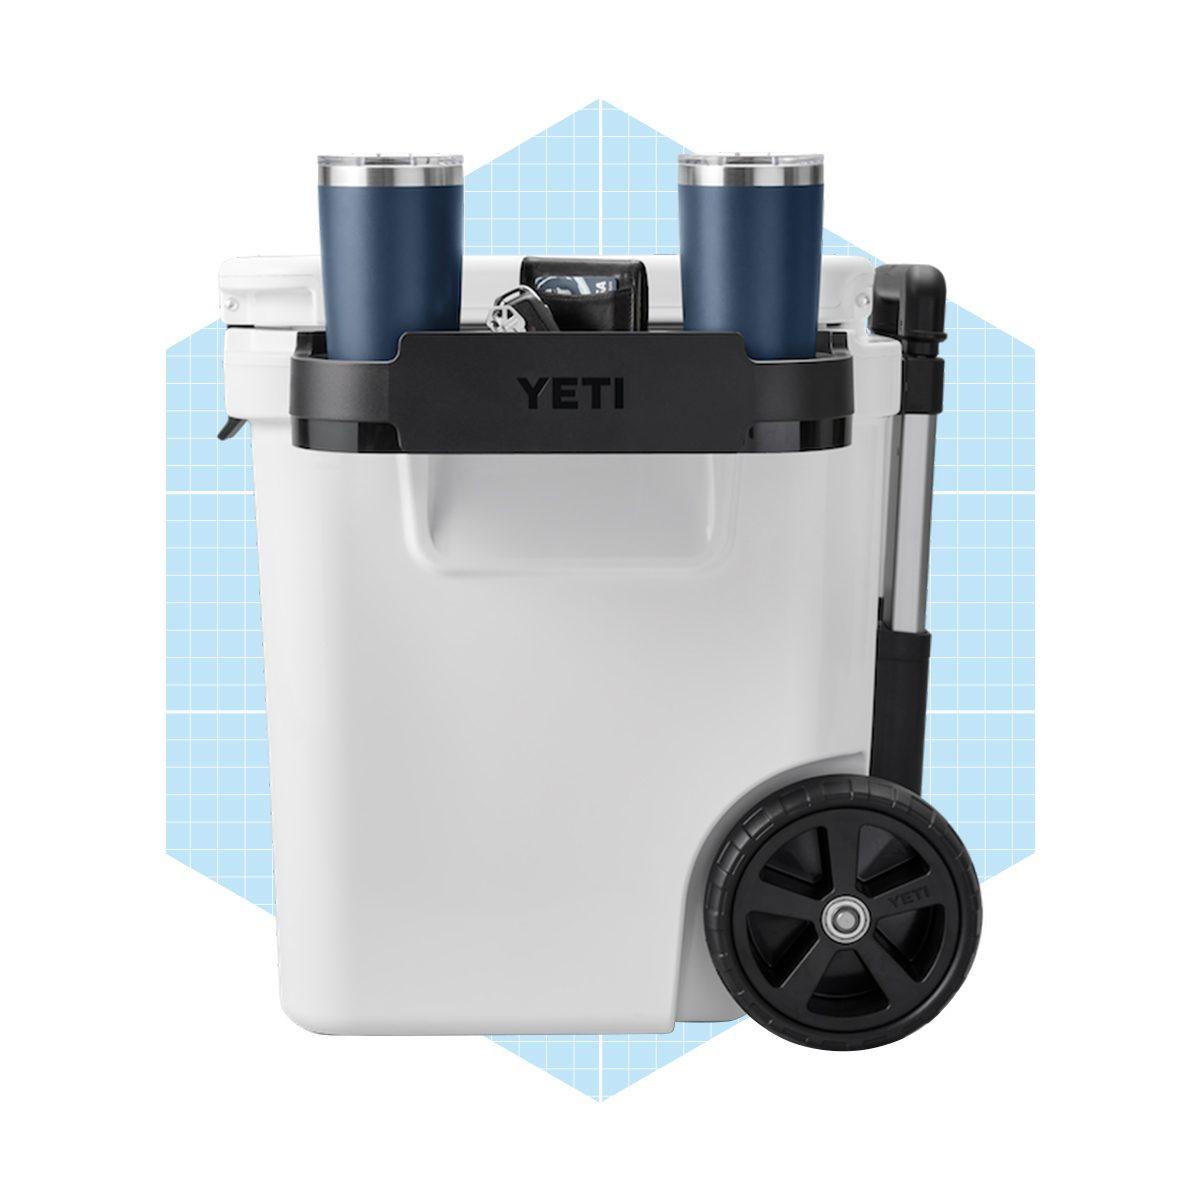 Yeti's Can Cooler Is the Hot Weather Accessory I Recommend to